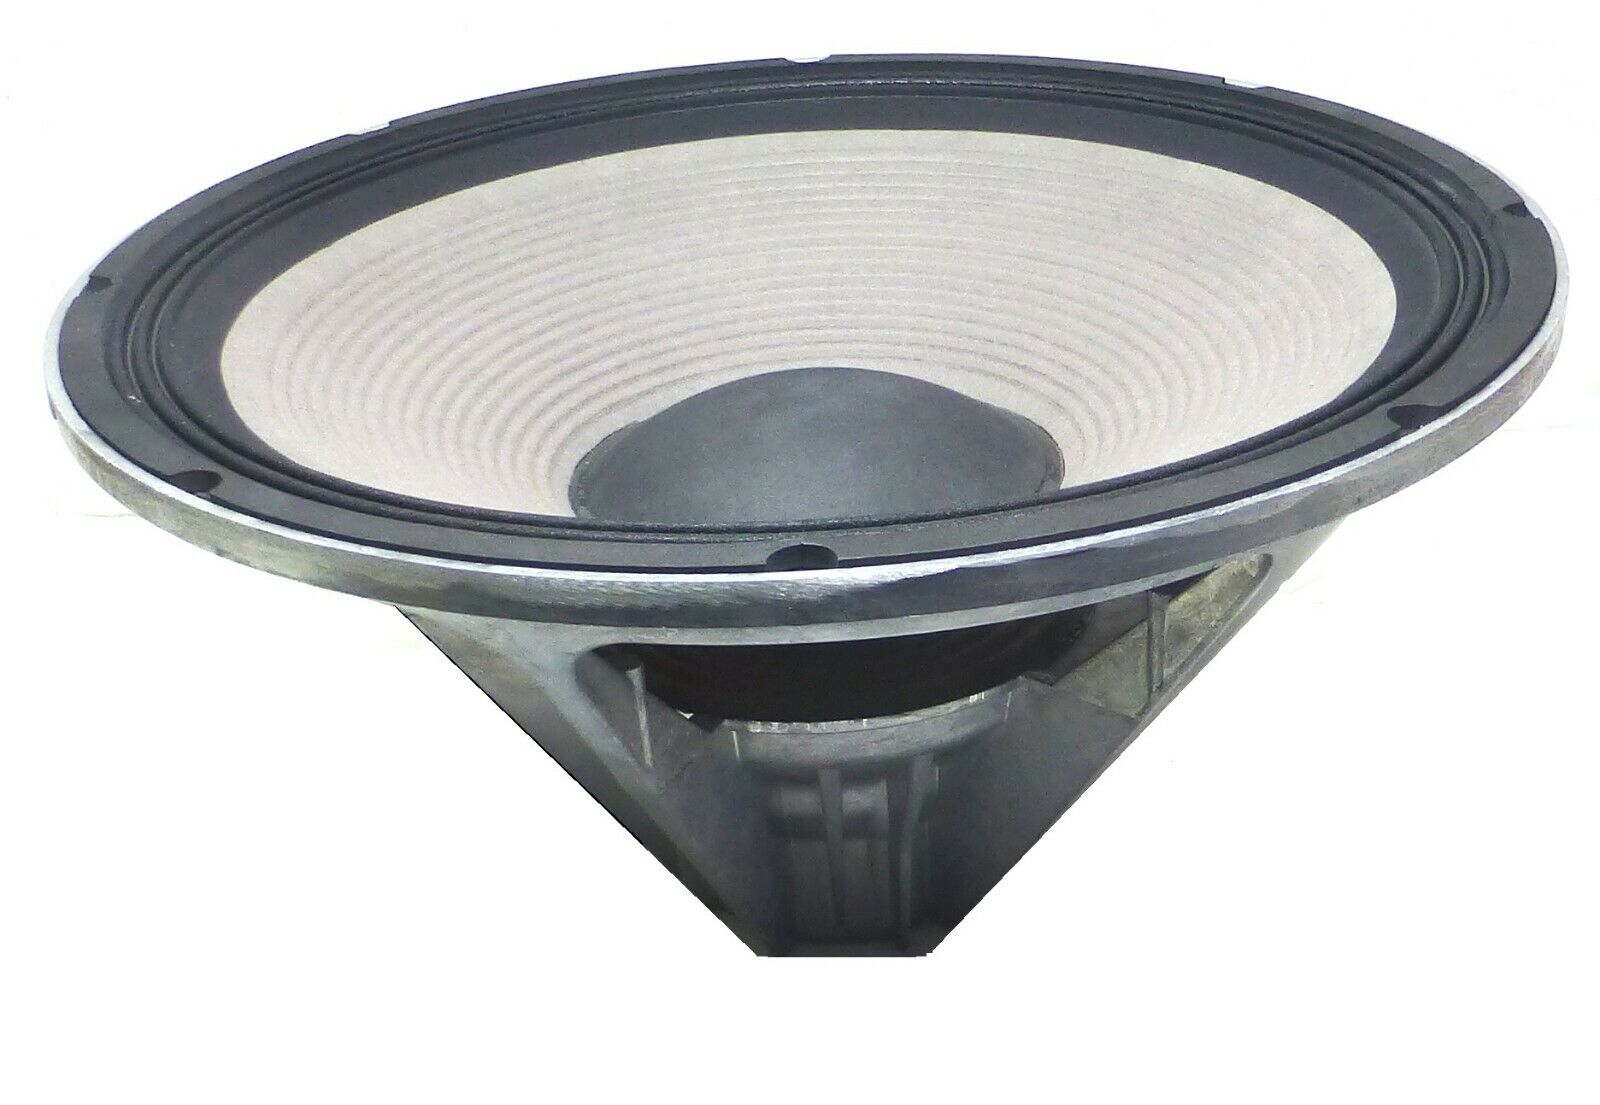 LASE Replacement 18" Speaker for JBL268G / Eon 518S